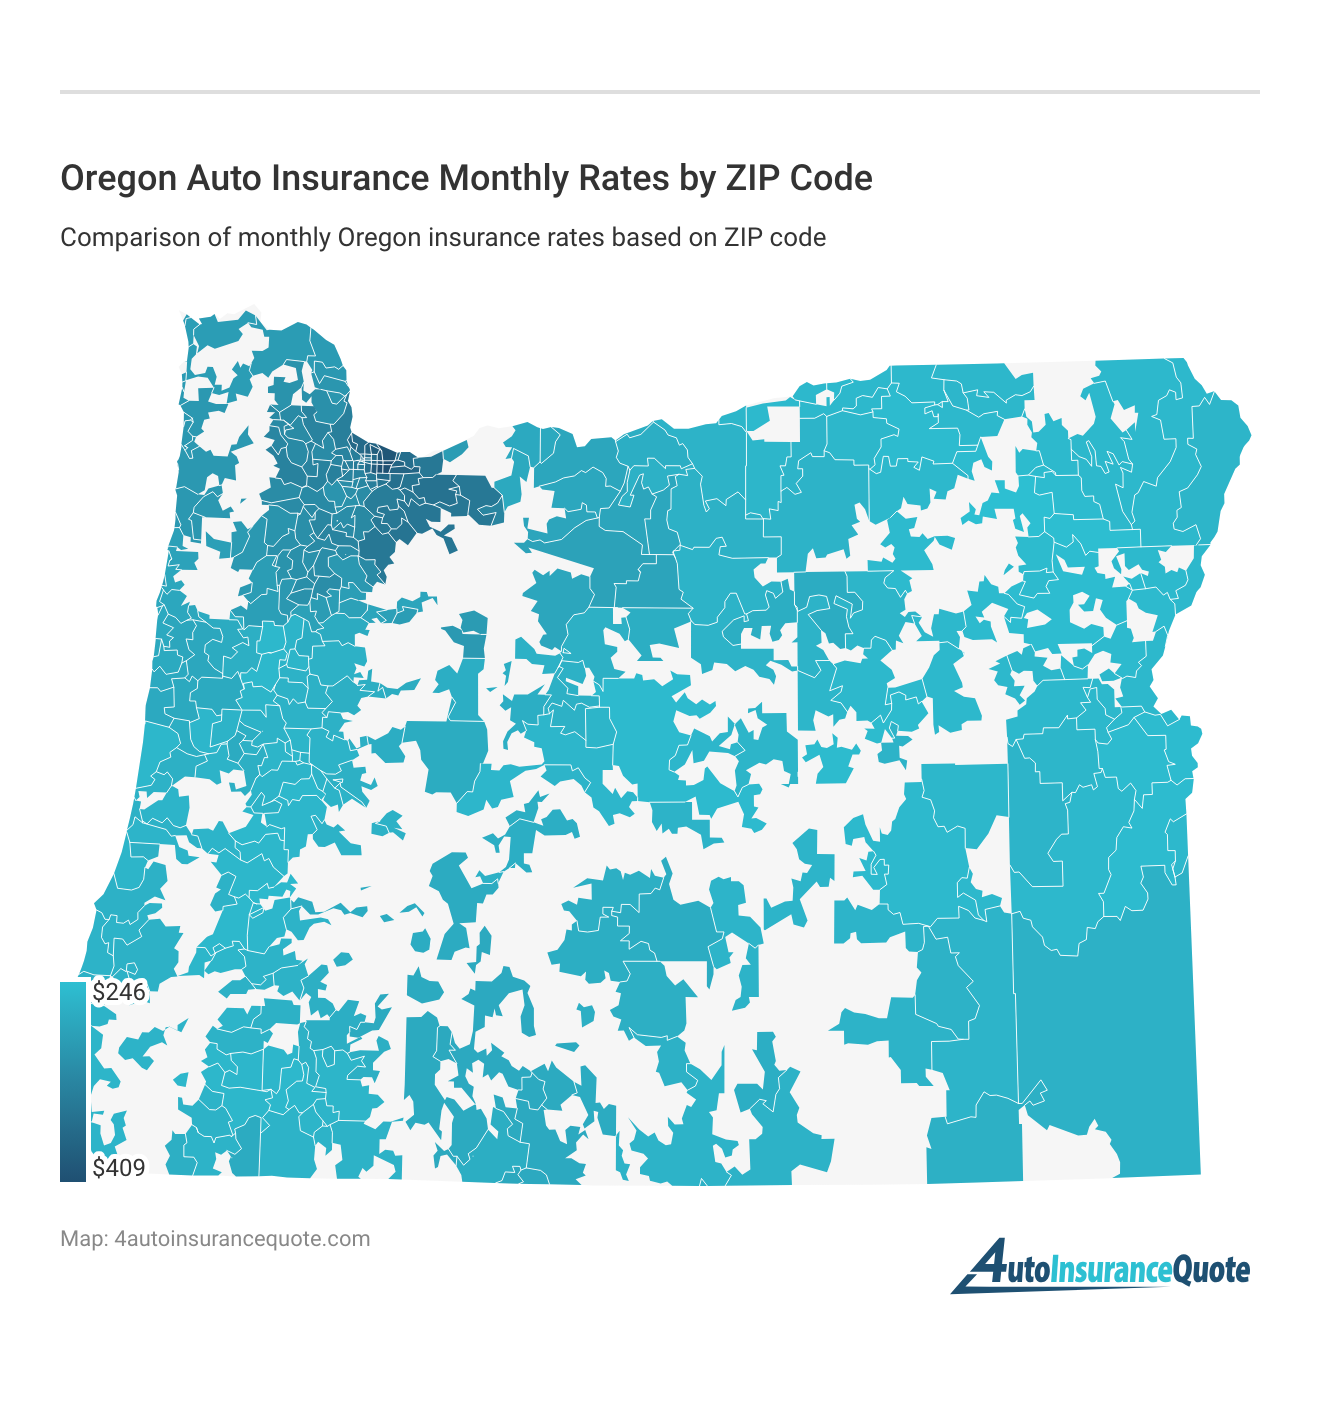 <h3>Oregon Auto Insurance Monthly Rates by ZIP Code</h3>